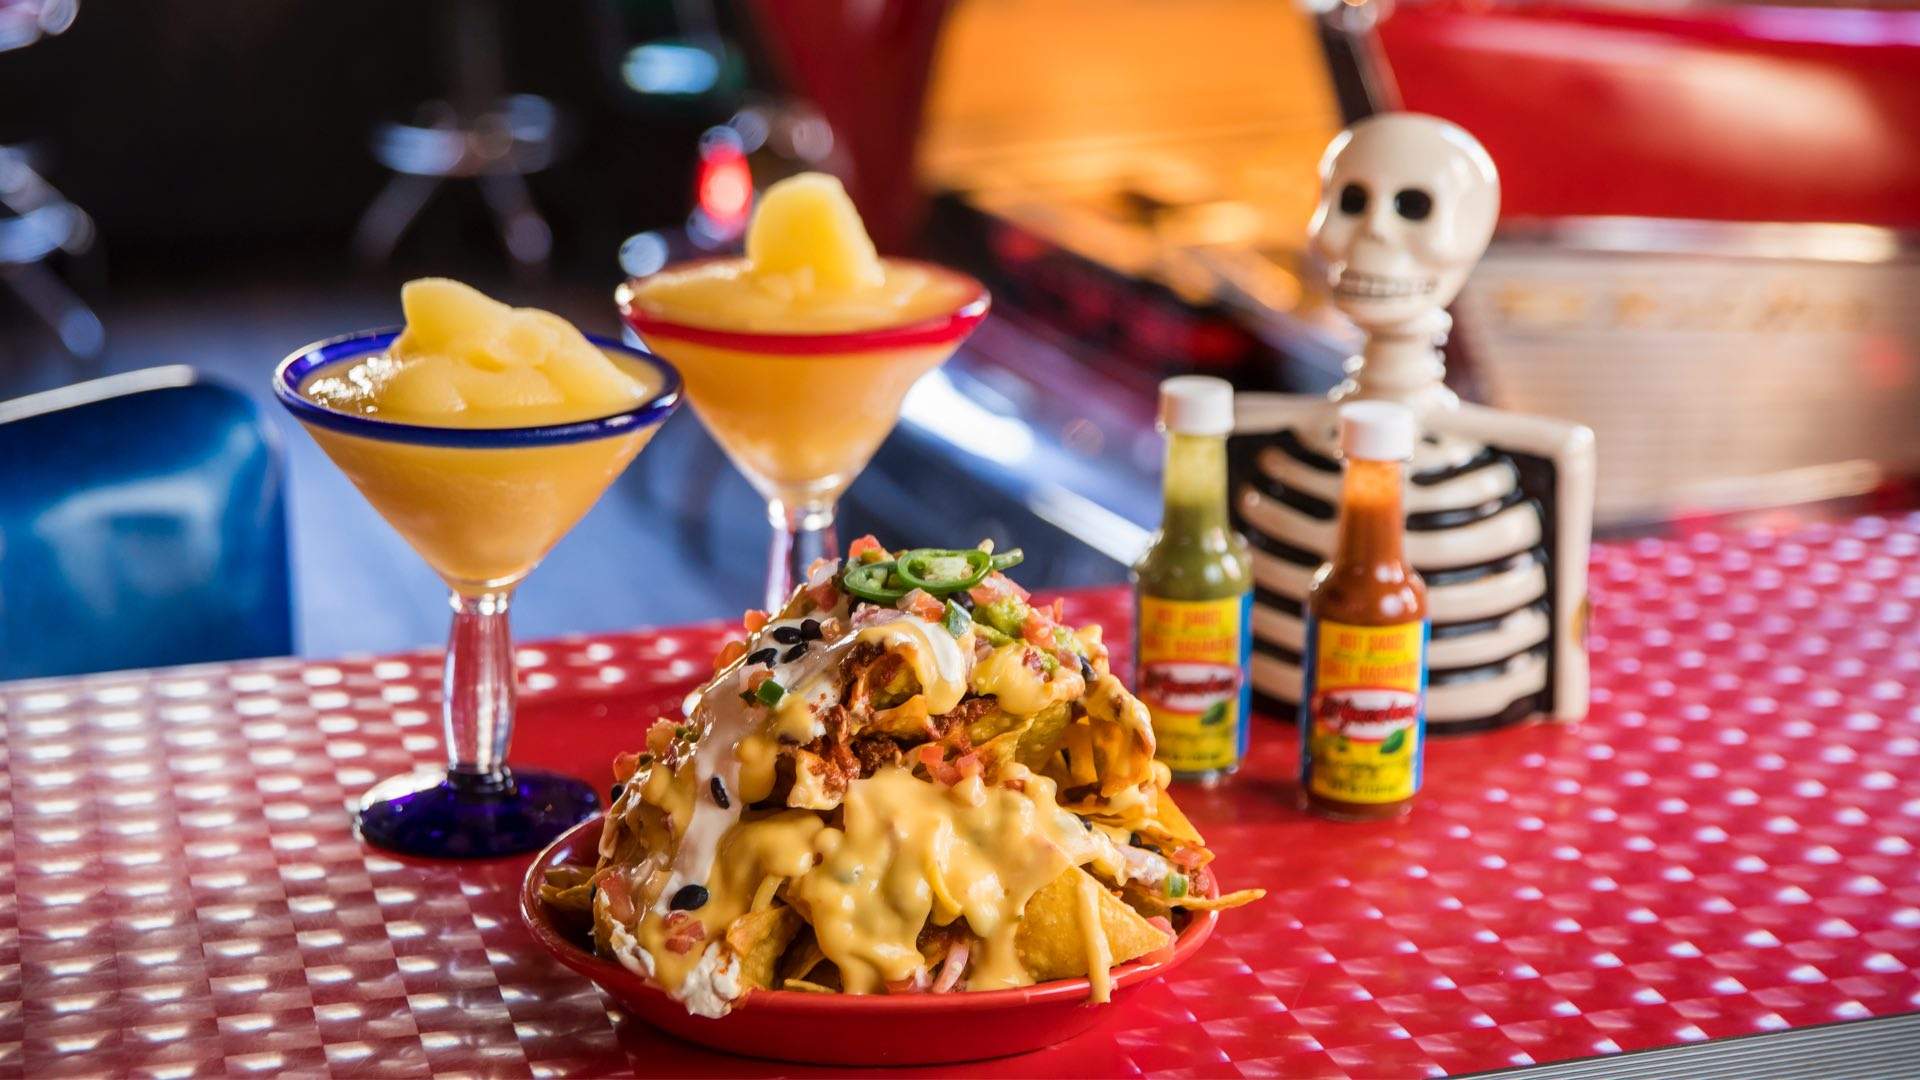 El Camino Cantina Is Bowen Hills' Colourful New Tex-Mex Joint from the Rockpool Dining Group